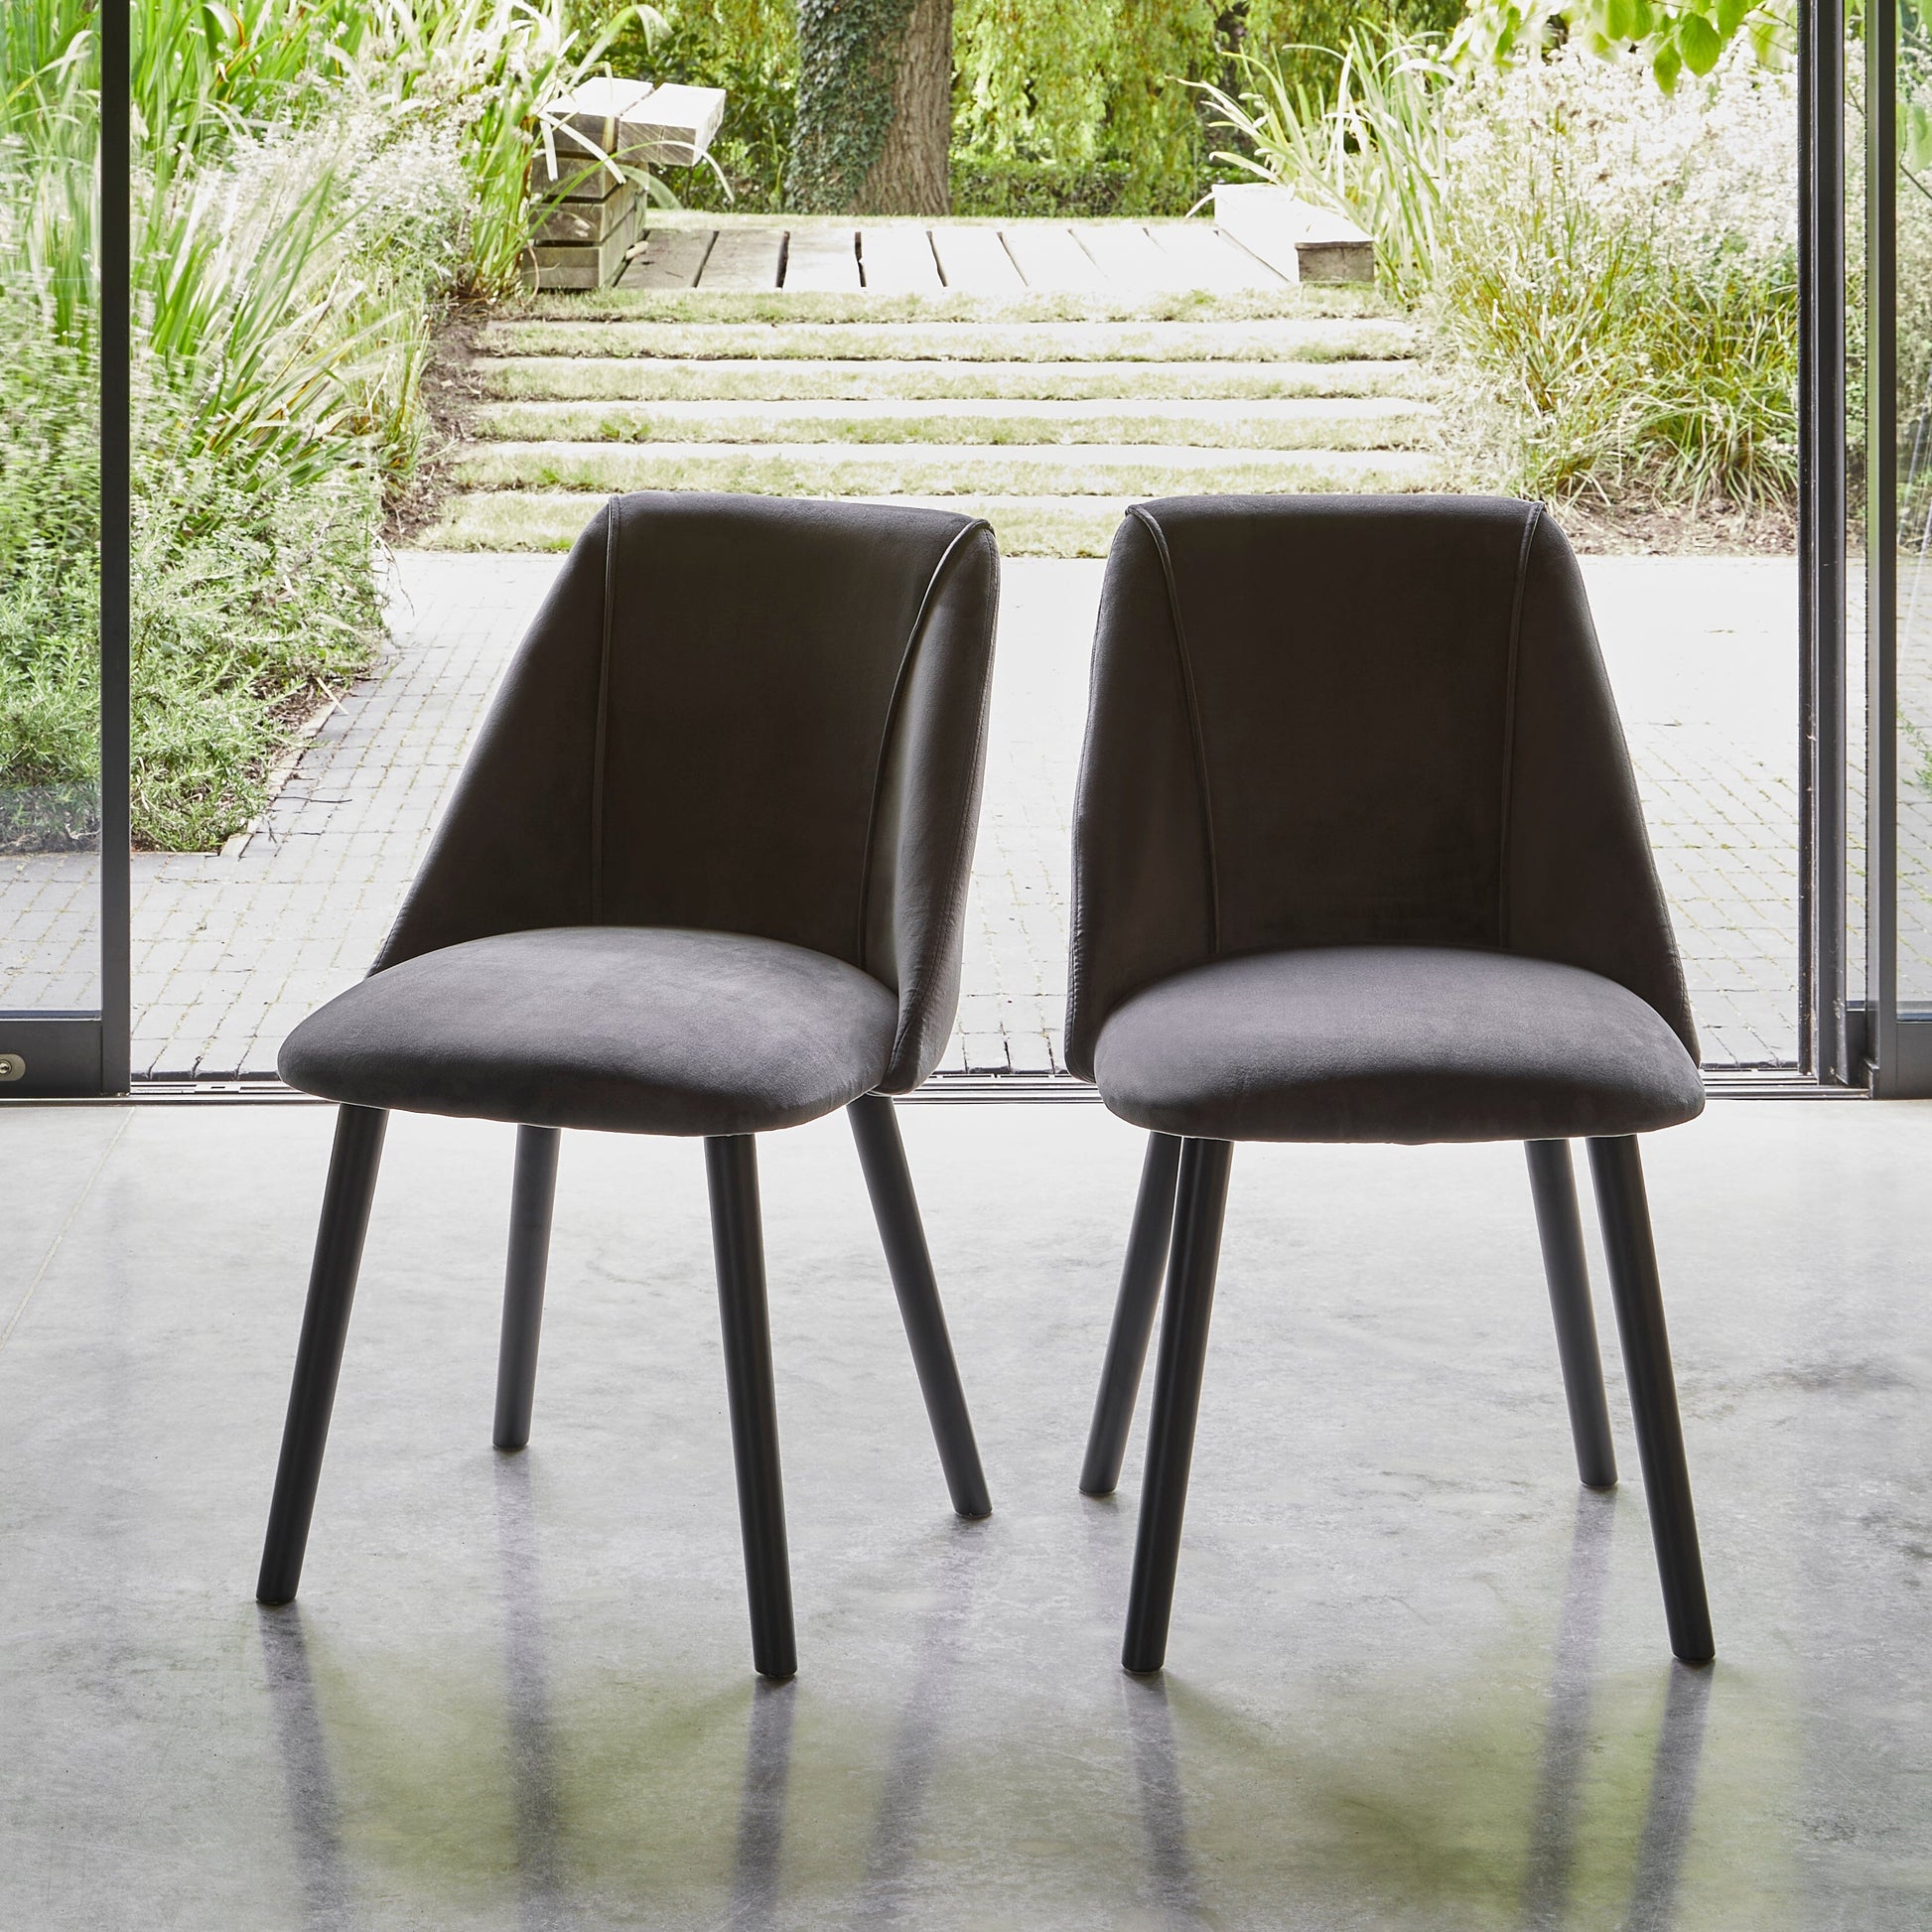 Willow 4 Seater Black Dining Table Set - Freya Grey Dining Chairs with Black Legs - Laura James